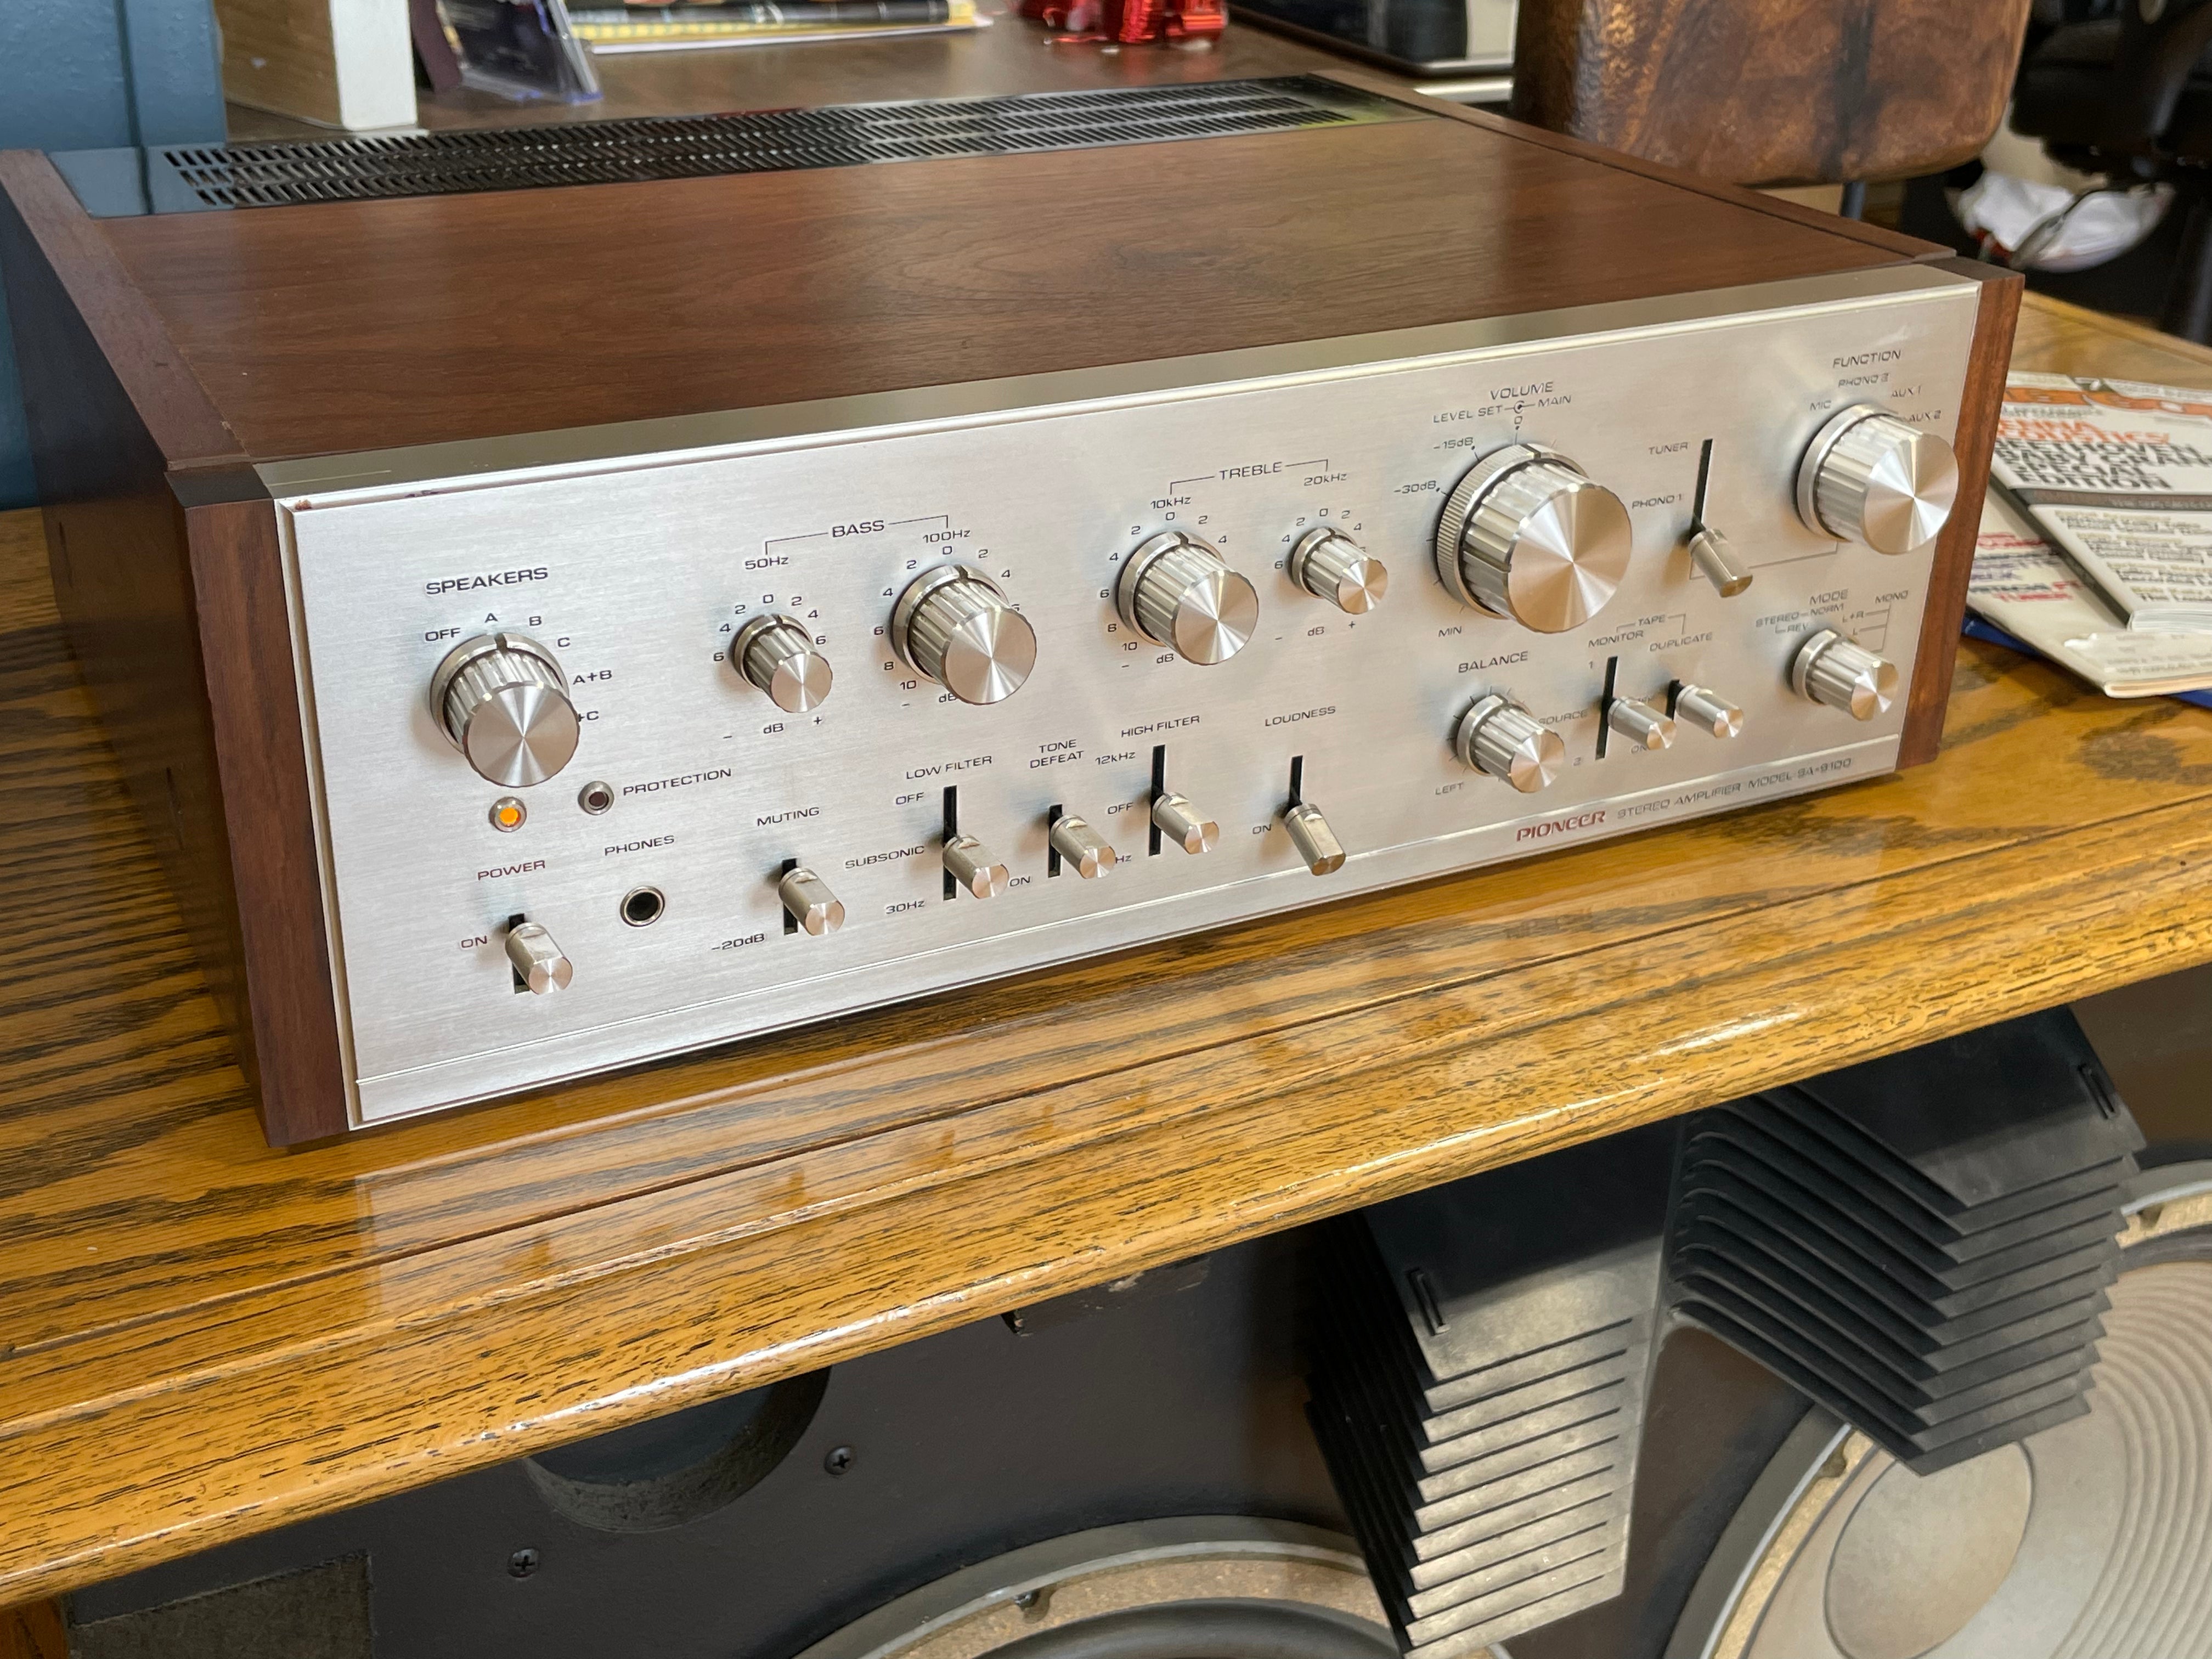 Pioneer SA-9100 Integrated - "Fabulous Vintage Piece" - SOLD